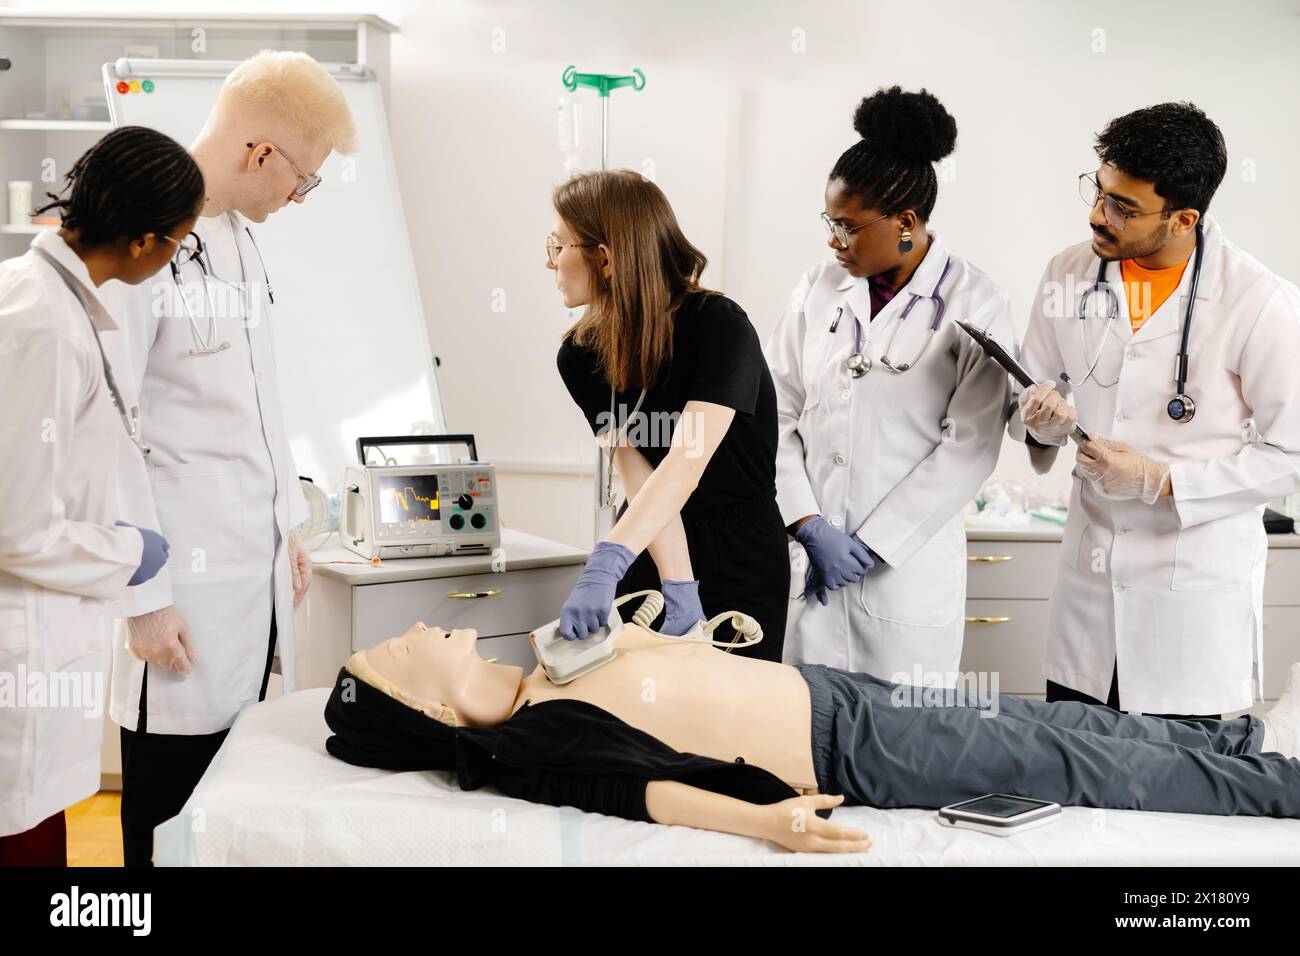 A woman lying on a bed while a group of doctors stand around her, discussing her medical condition and treatment options. Stock Photo